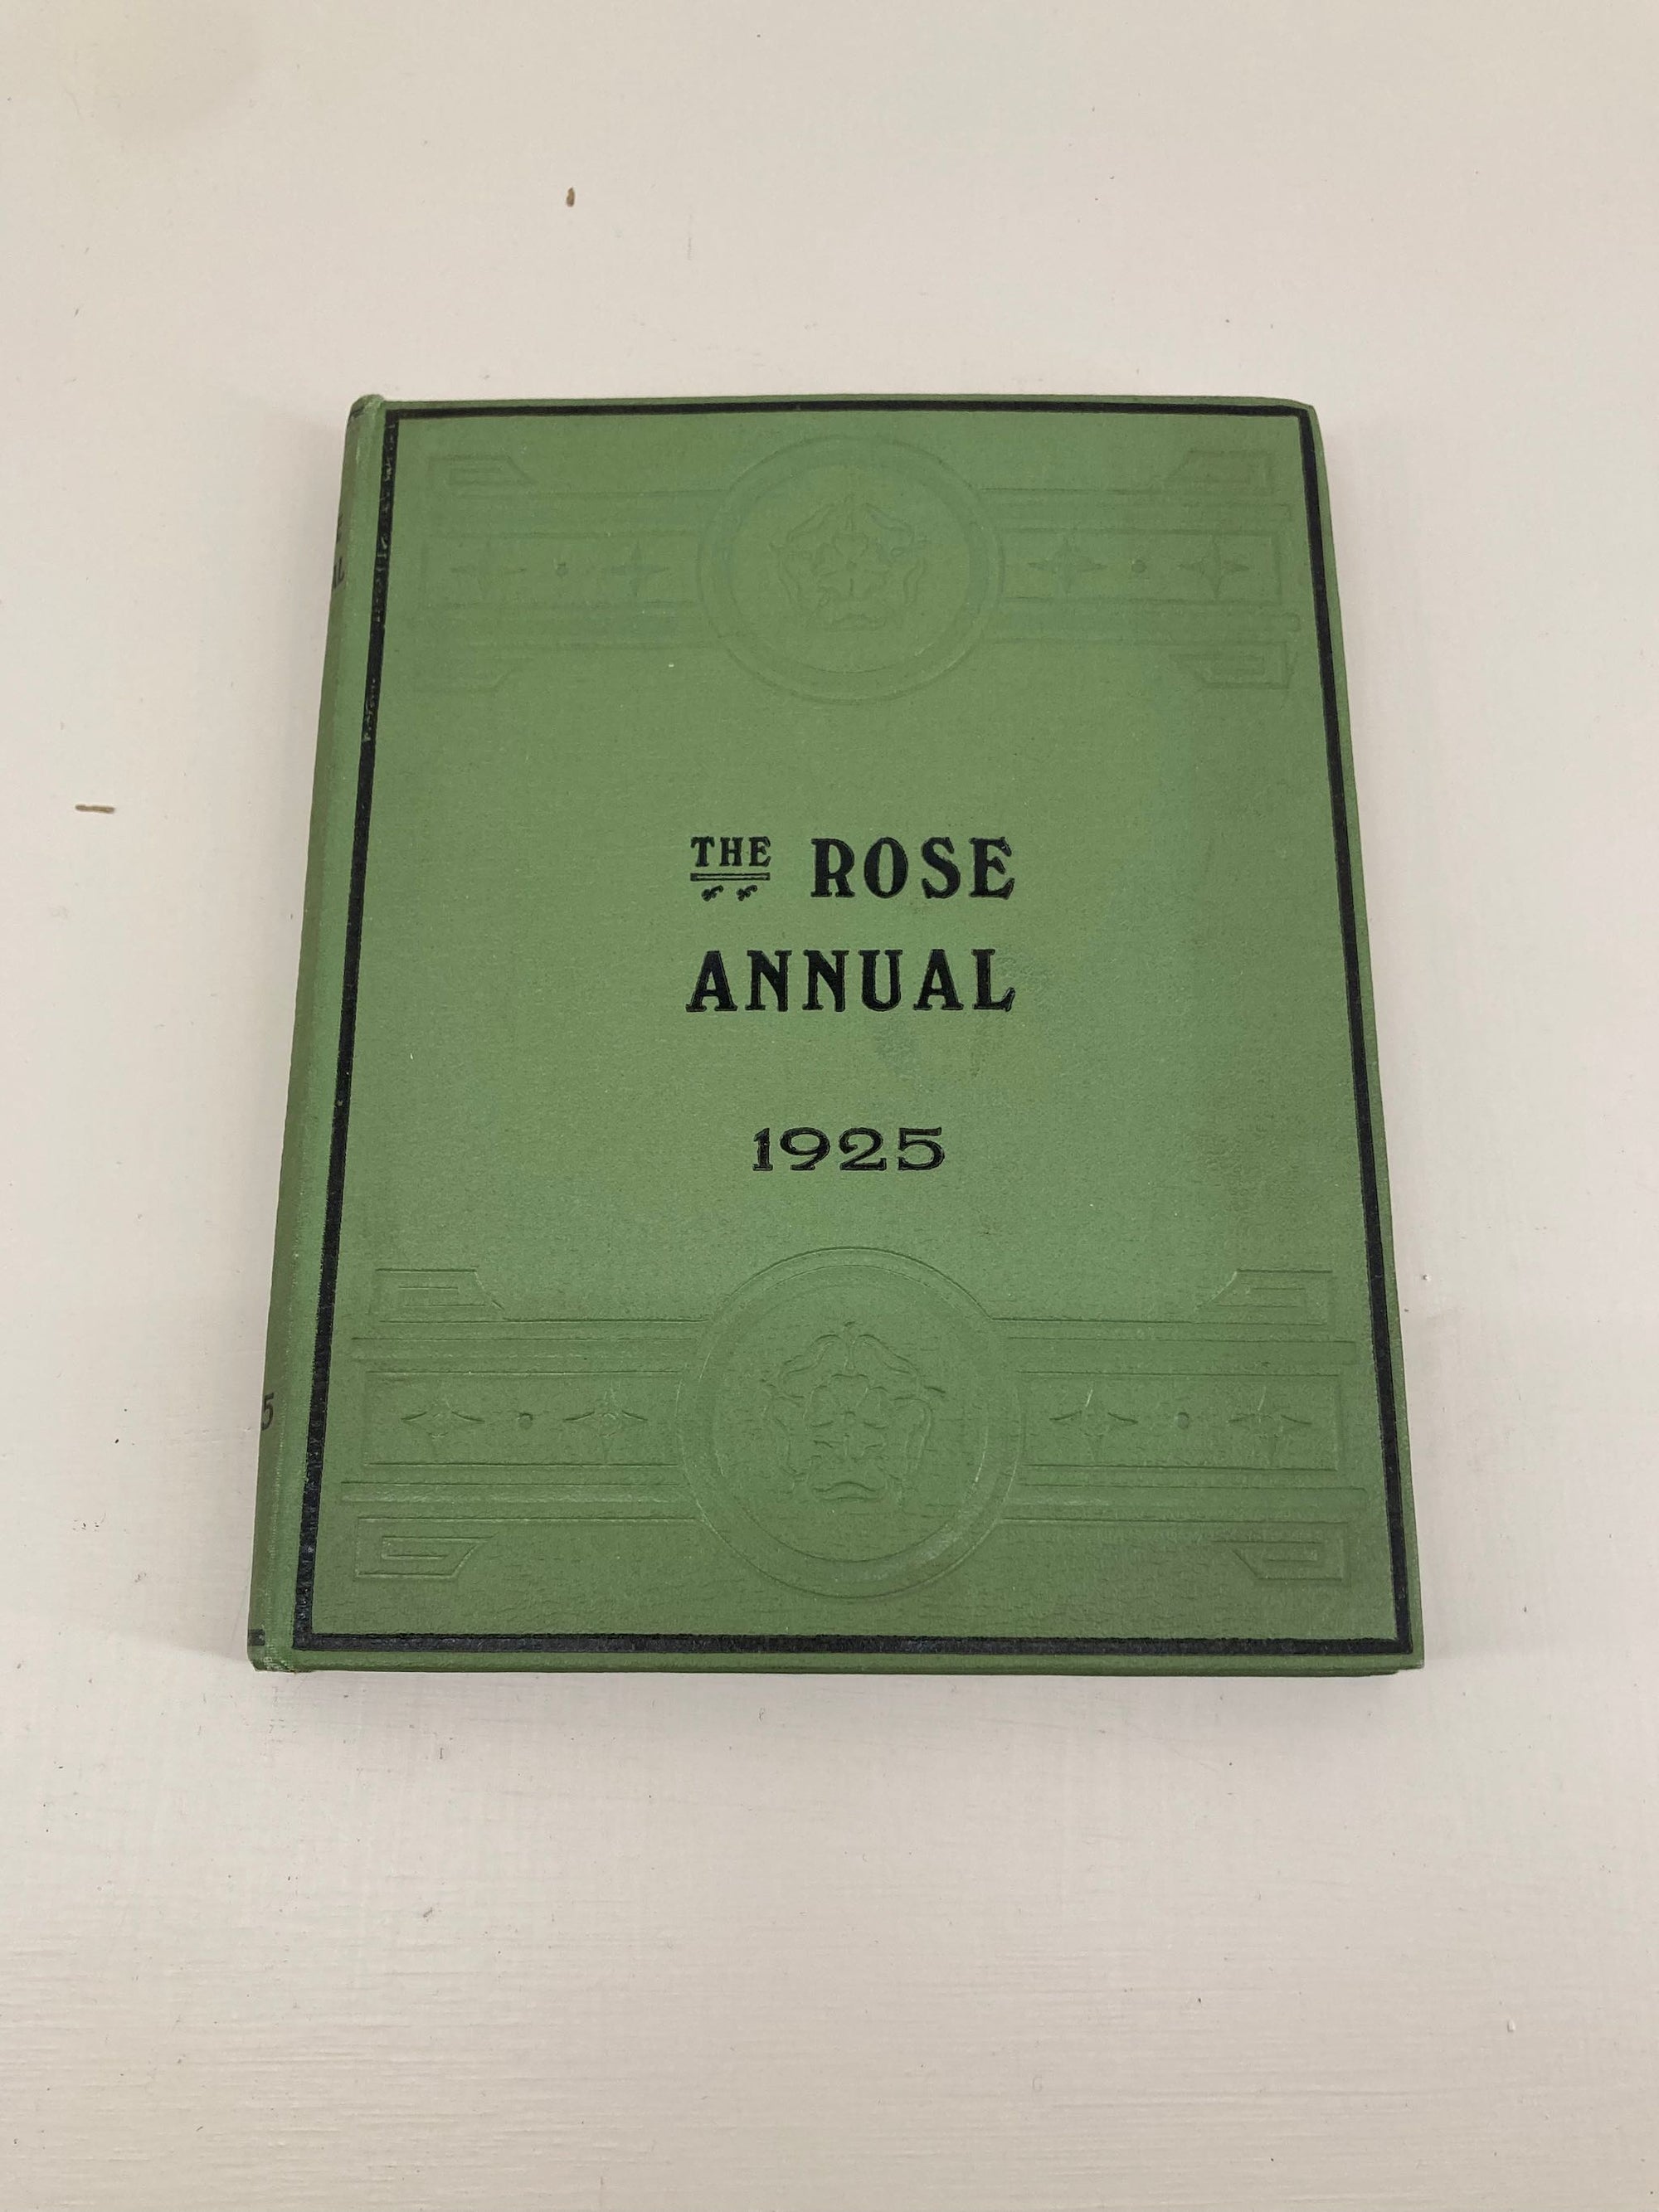 The Rose Annual 1925